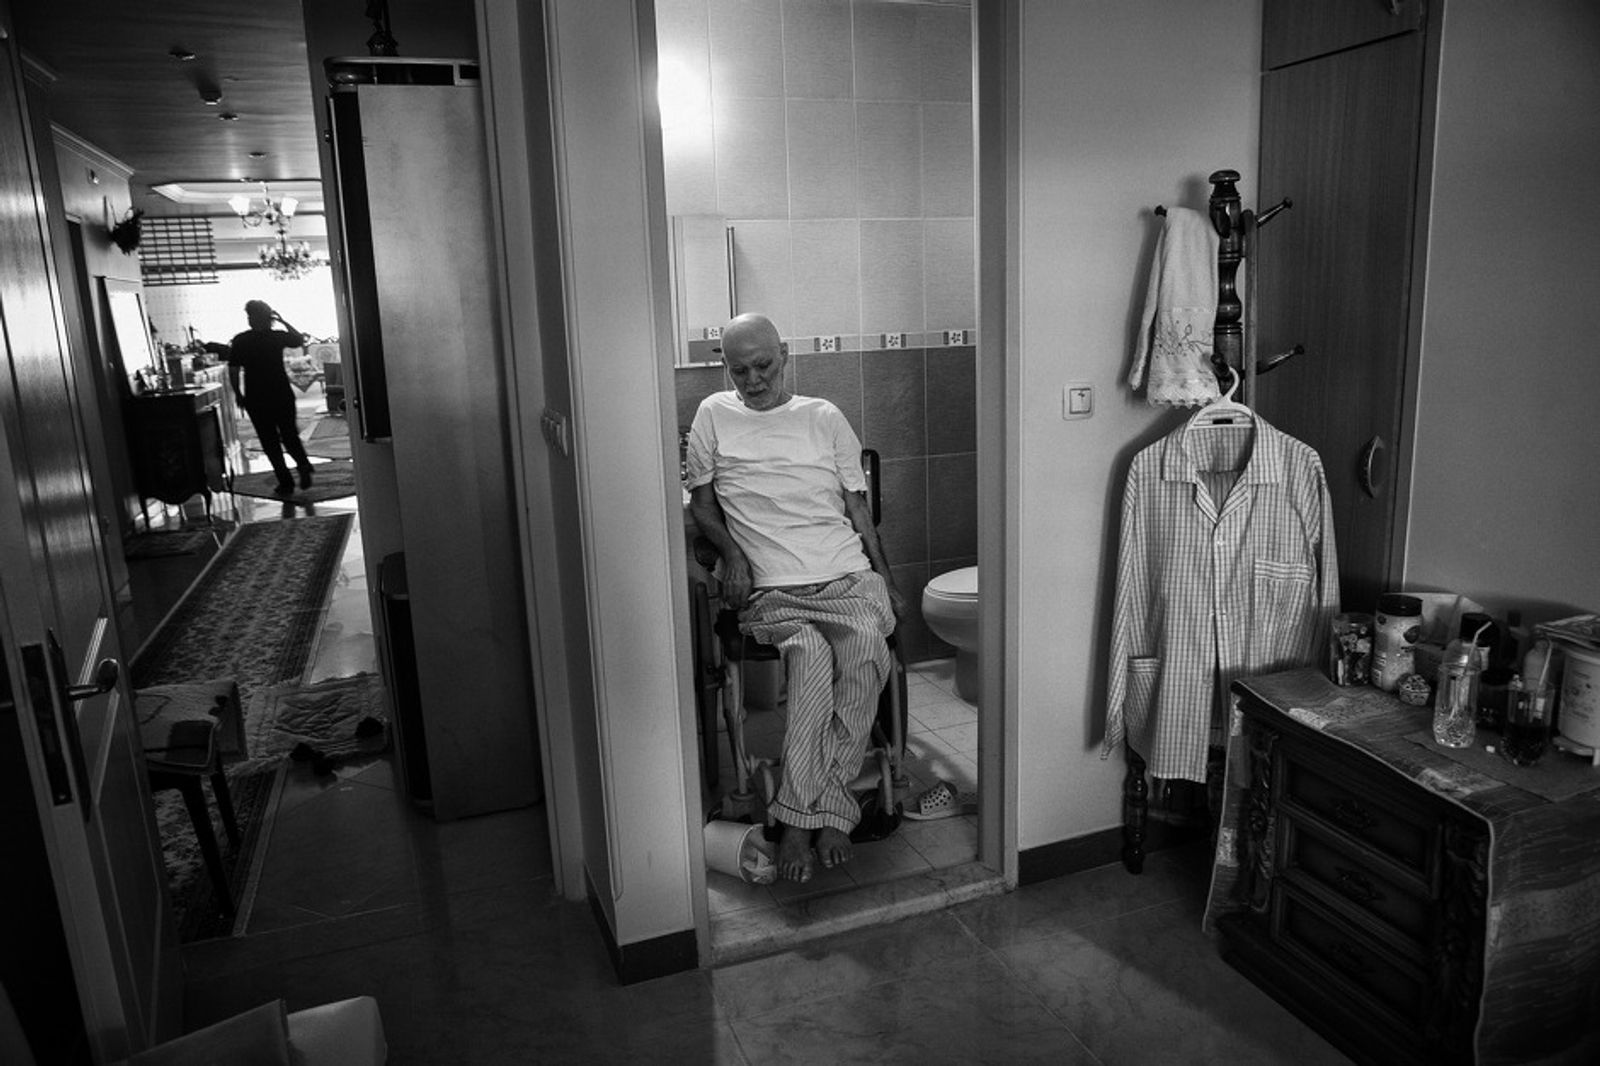 © Jalal Shams Azaran - Father is in restroom waiting for his daughter, Delaaram, to help him.